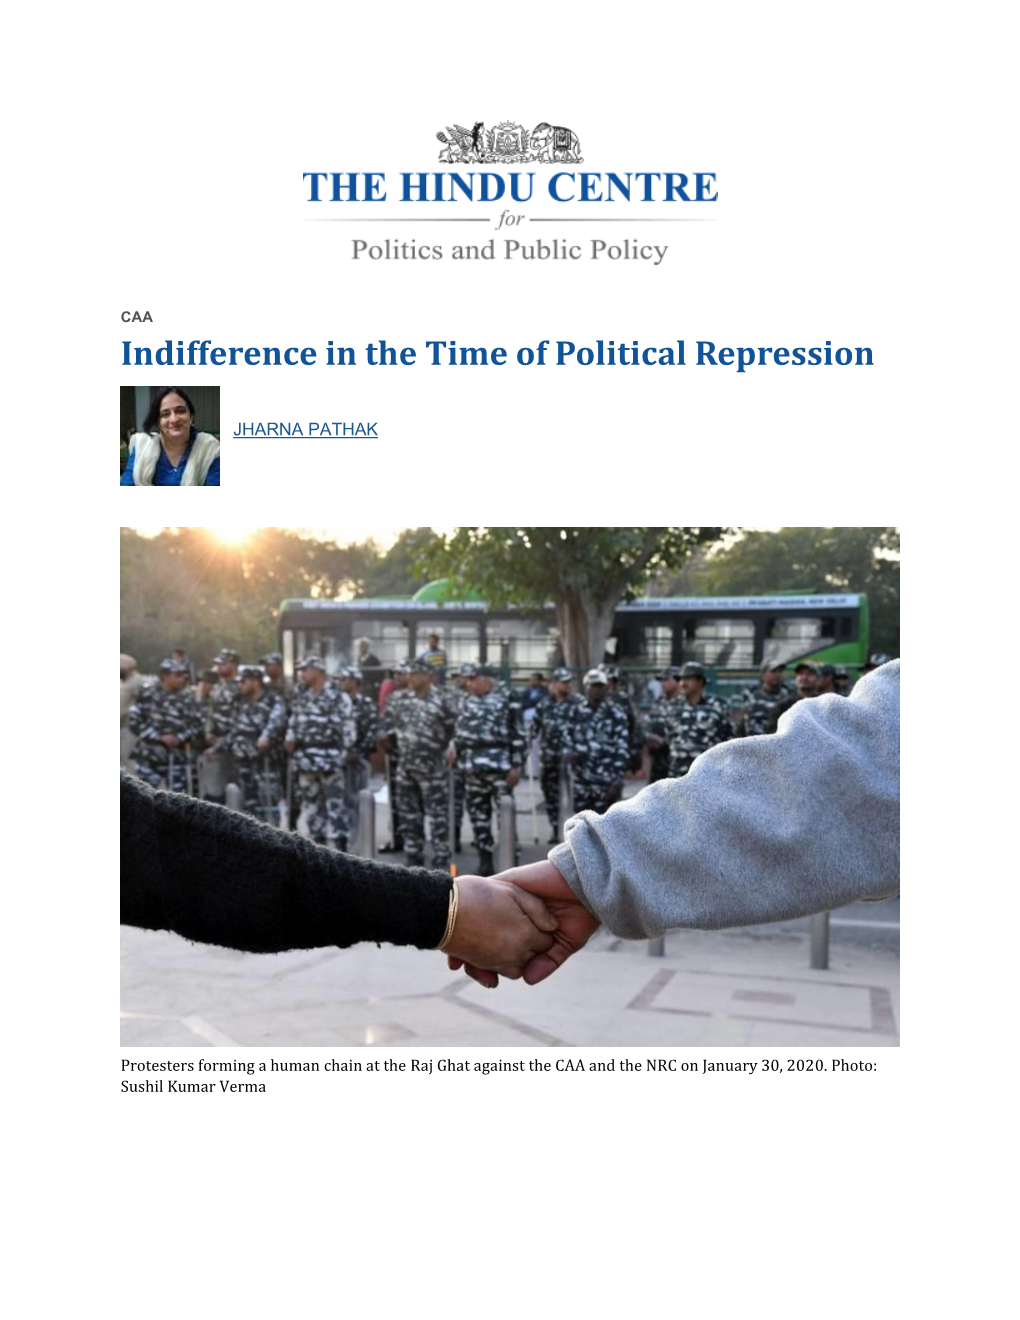 Indifference in the Time of Political Repression